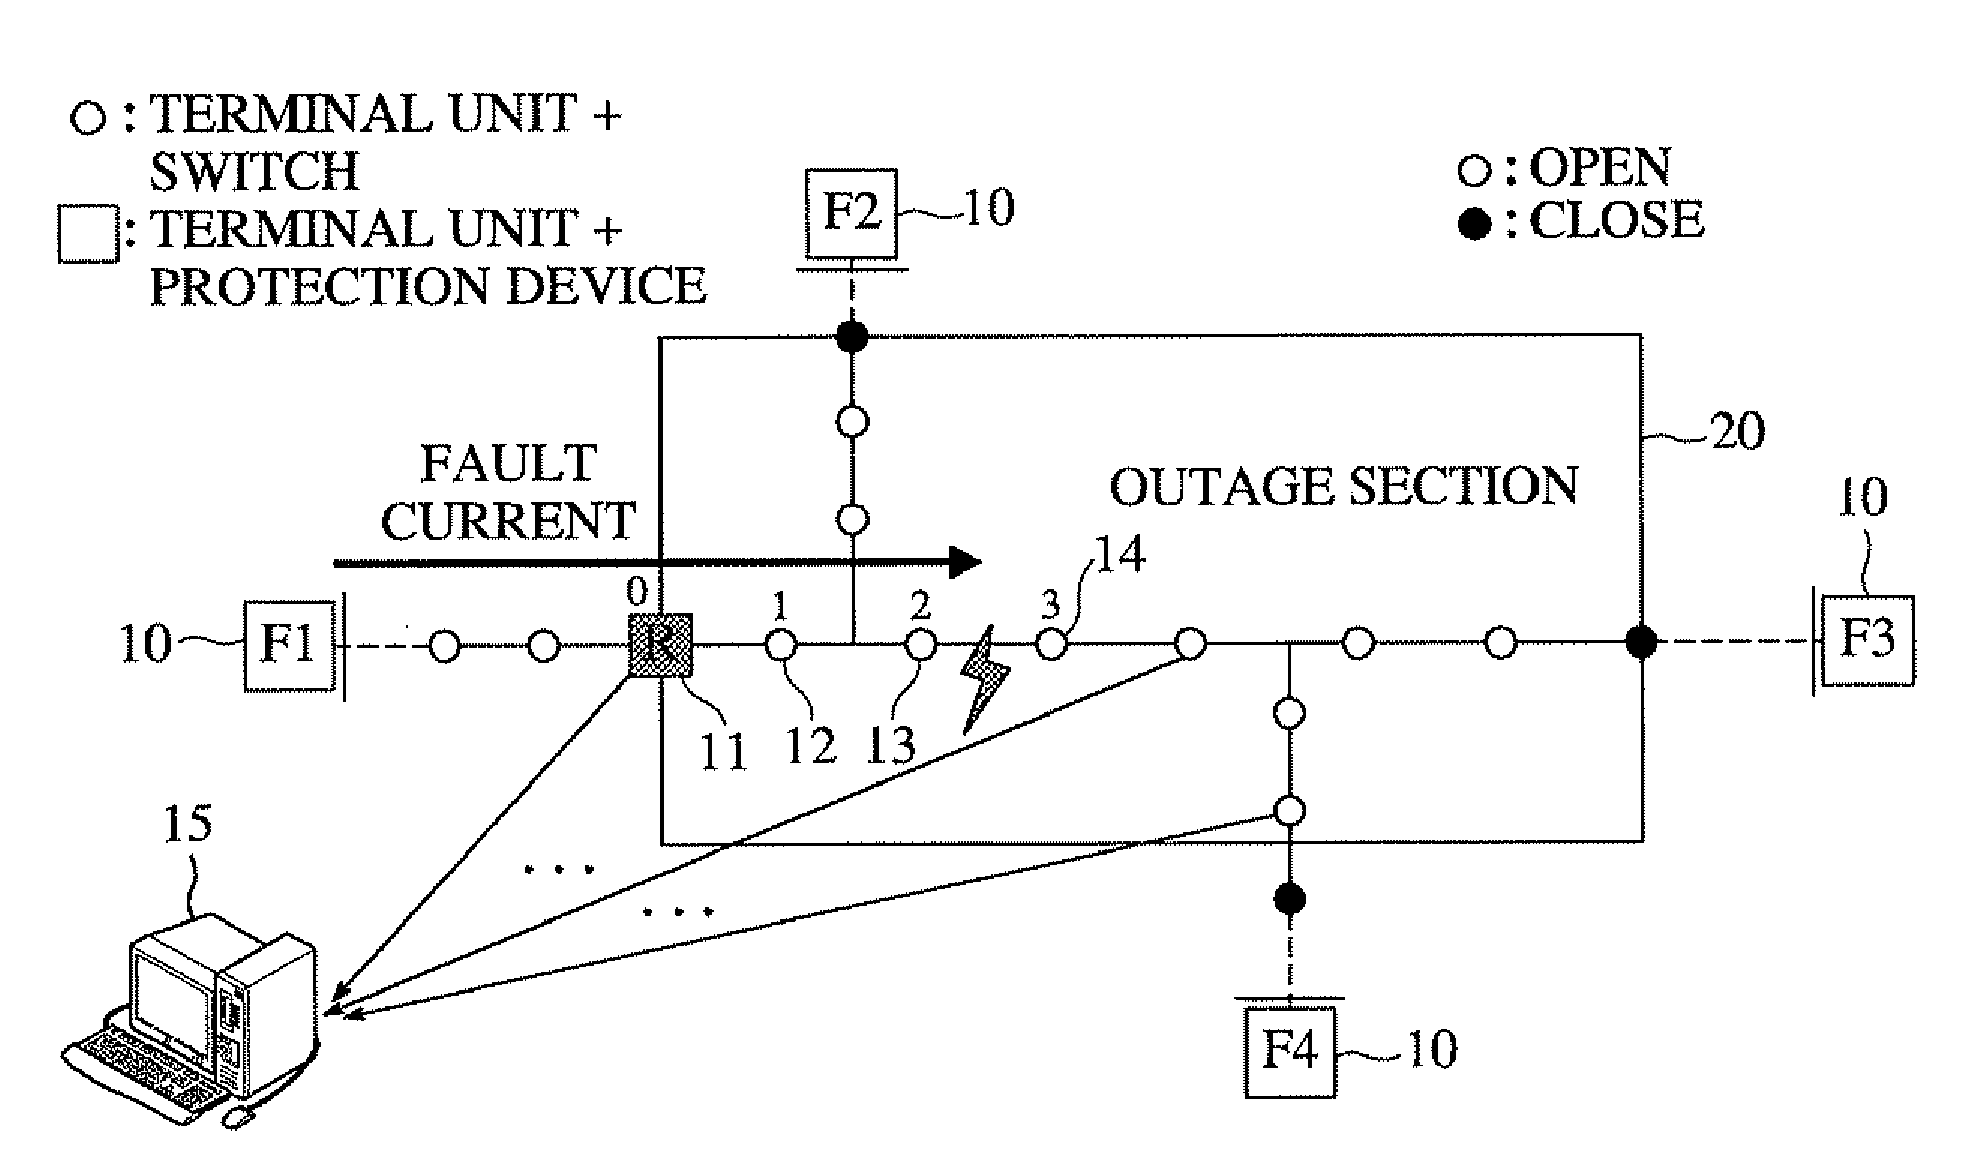 Method of Generating Fault Indication in Feeder Remote Terminal Unit for Power Distribution Automation System